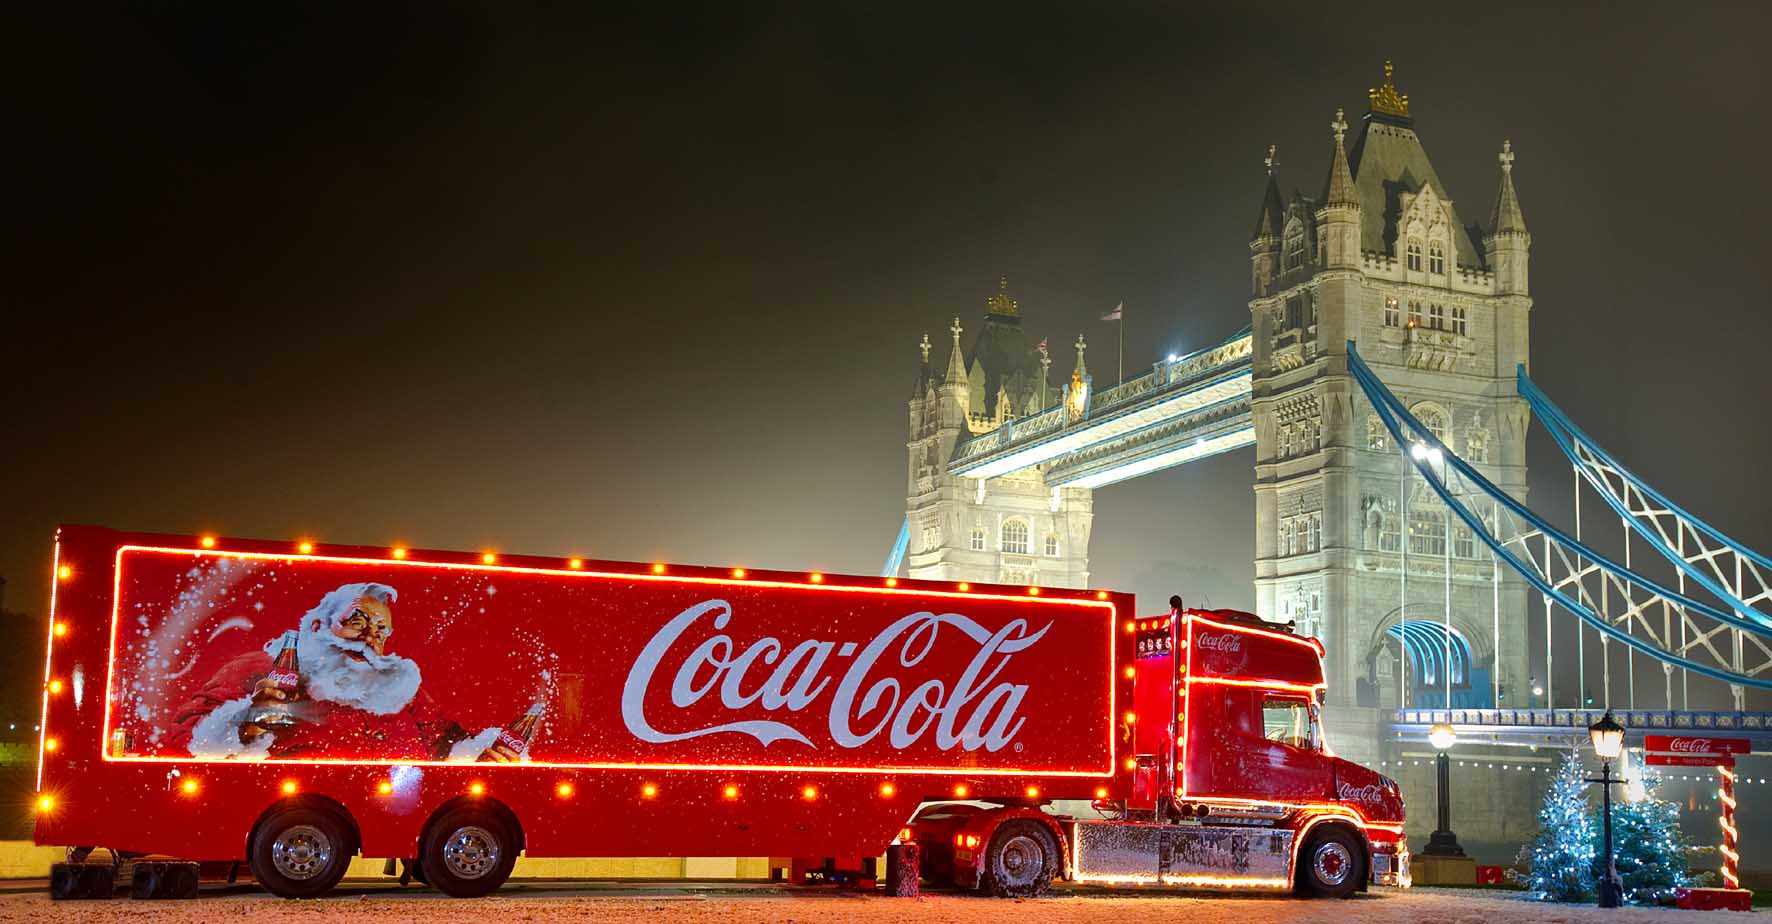 Coca Cola Christmas HD Wallpapers with Truck - 2015